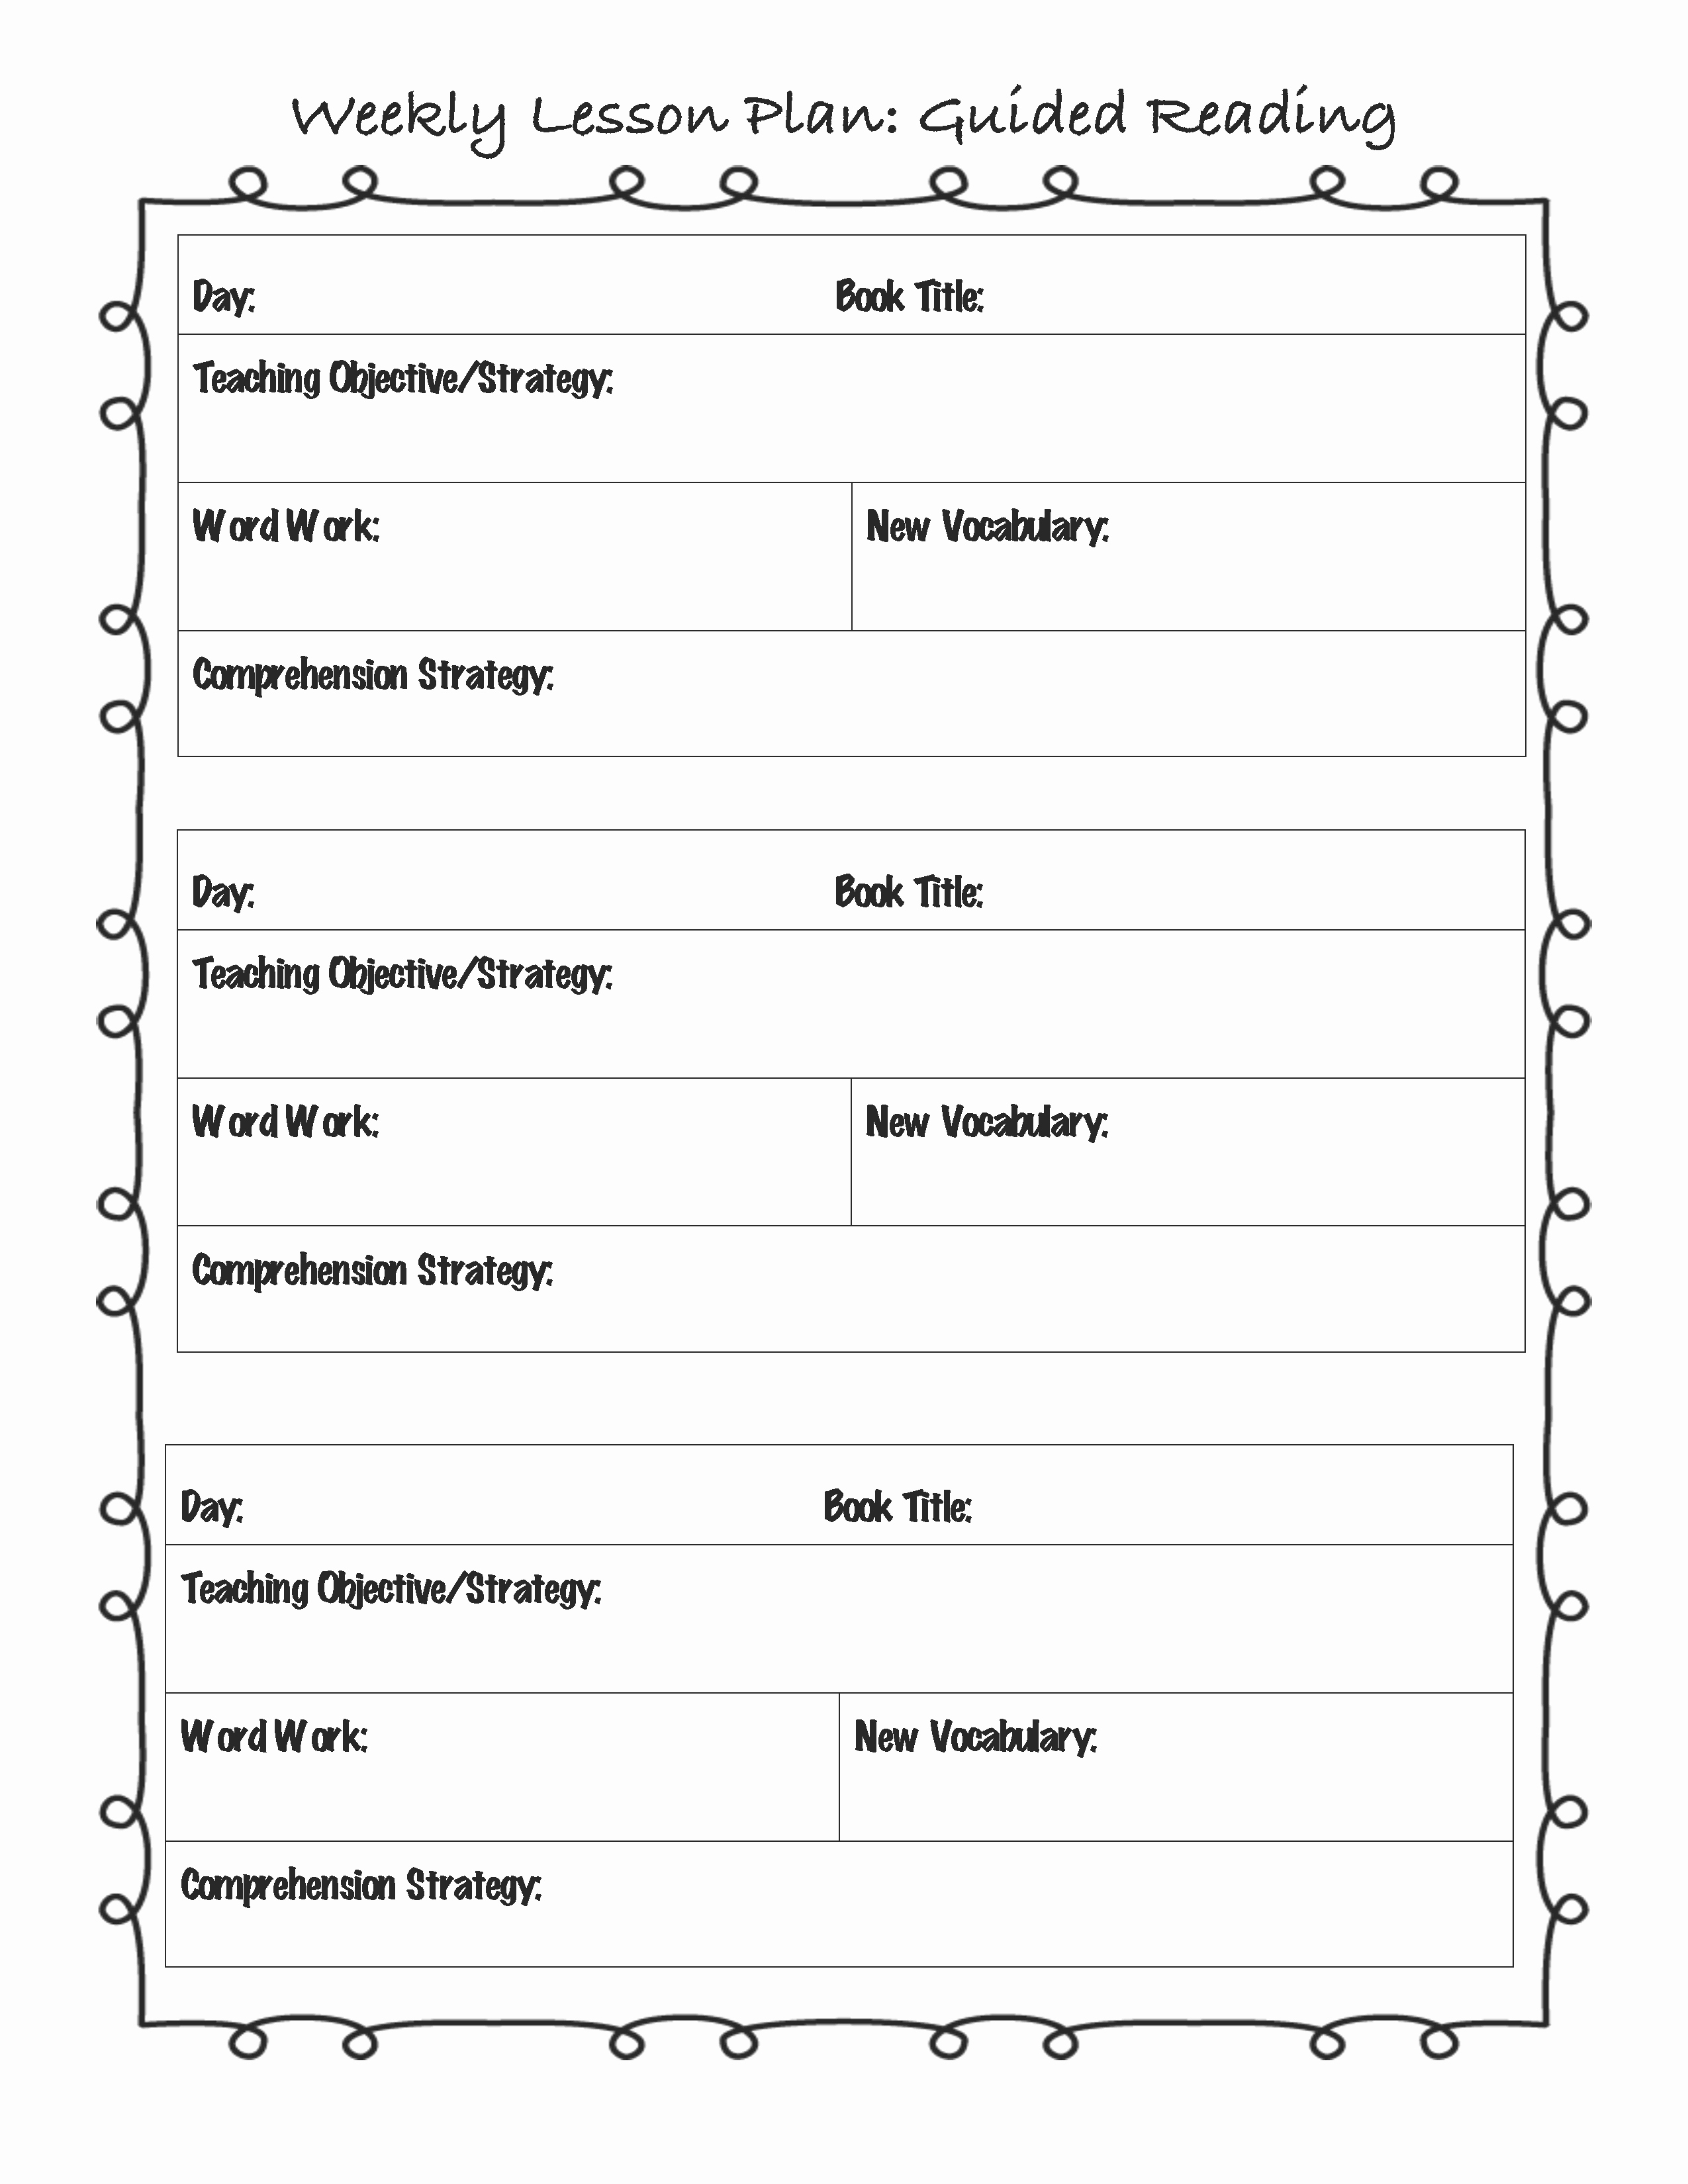 Weekly Lesson Plan Template Elementary Awesome Lesson Plan Template